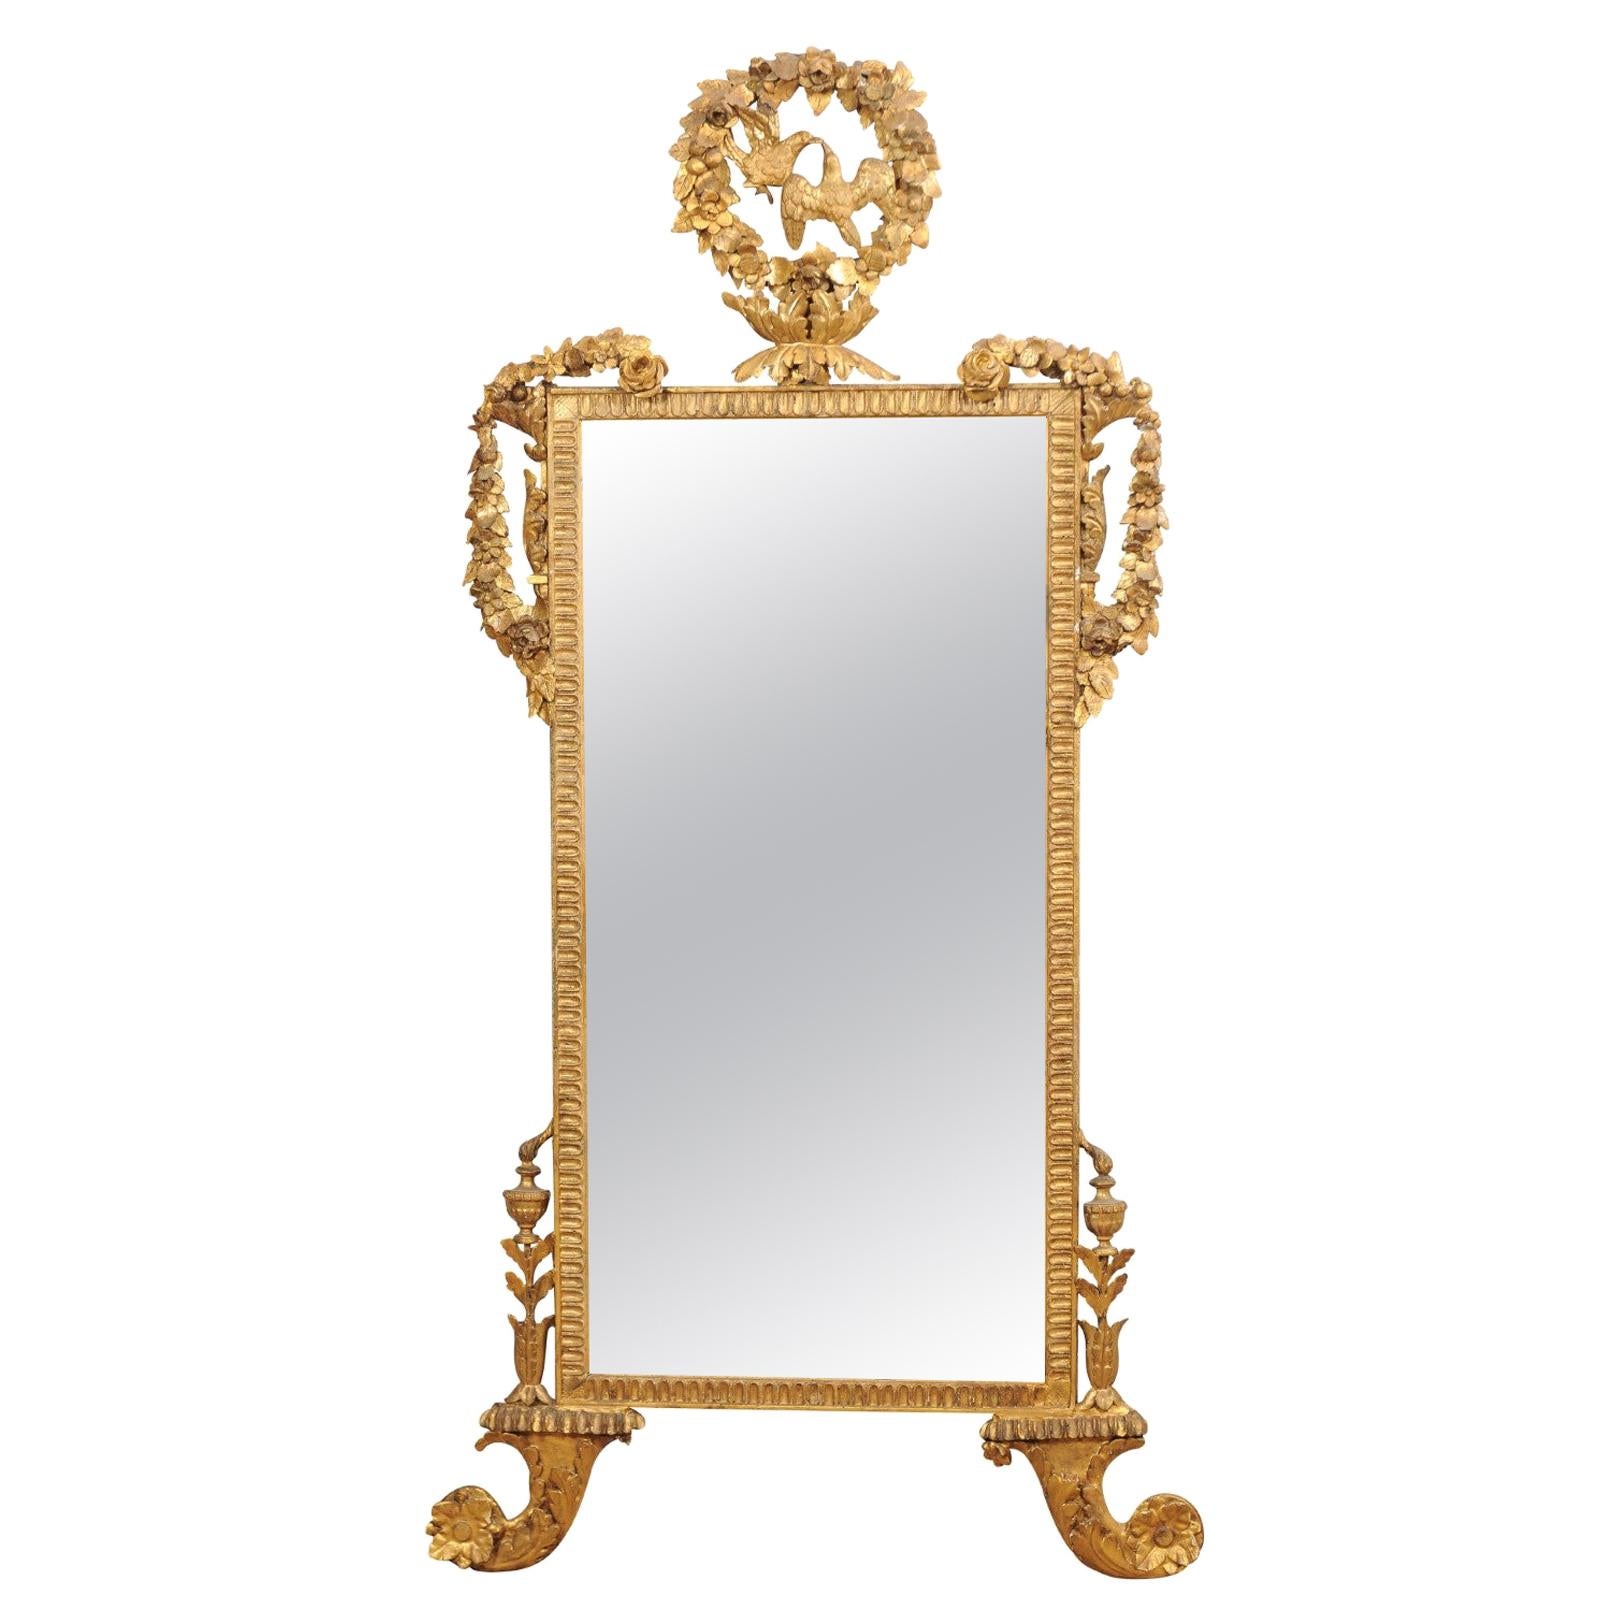 Giltwood Mirror with Rose Garland & Kissing Doves Crest, 19th Century Italy For Sale